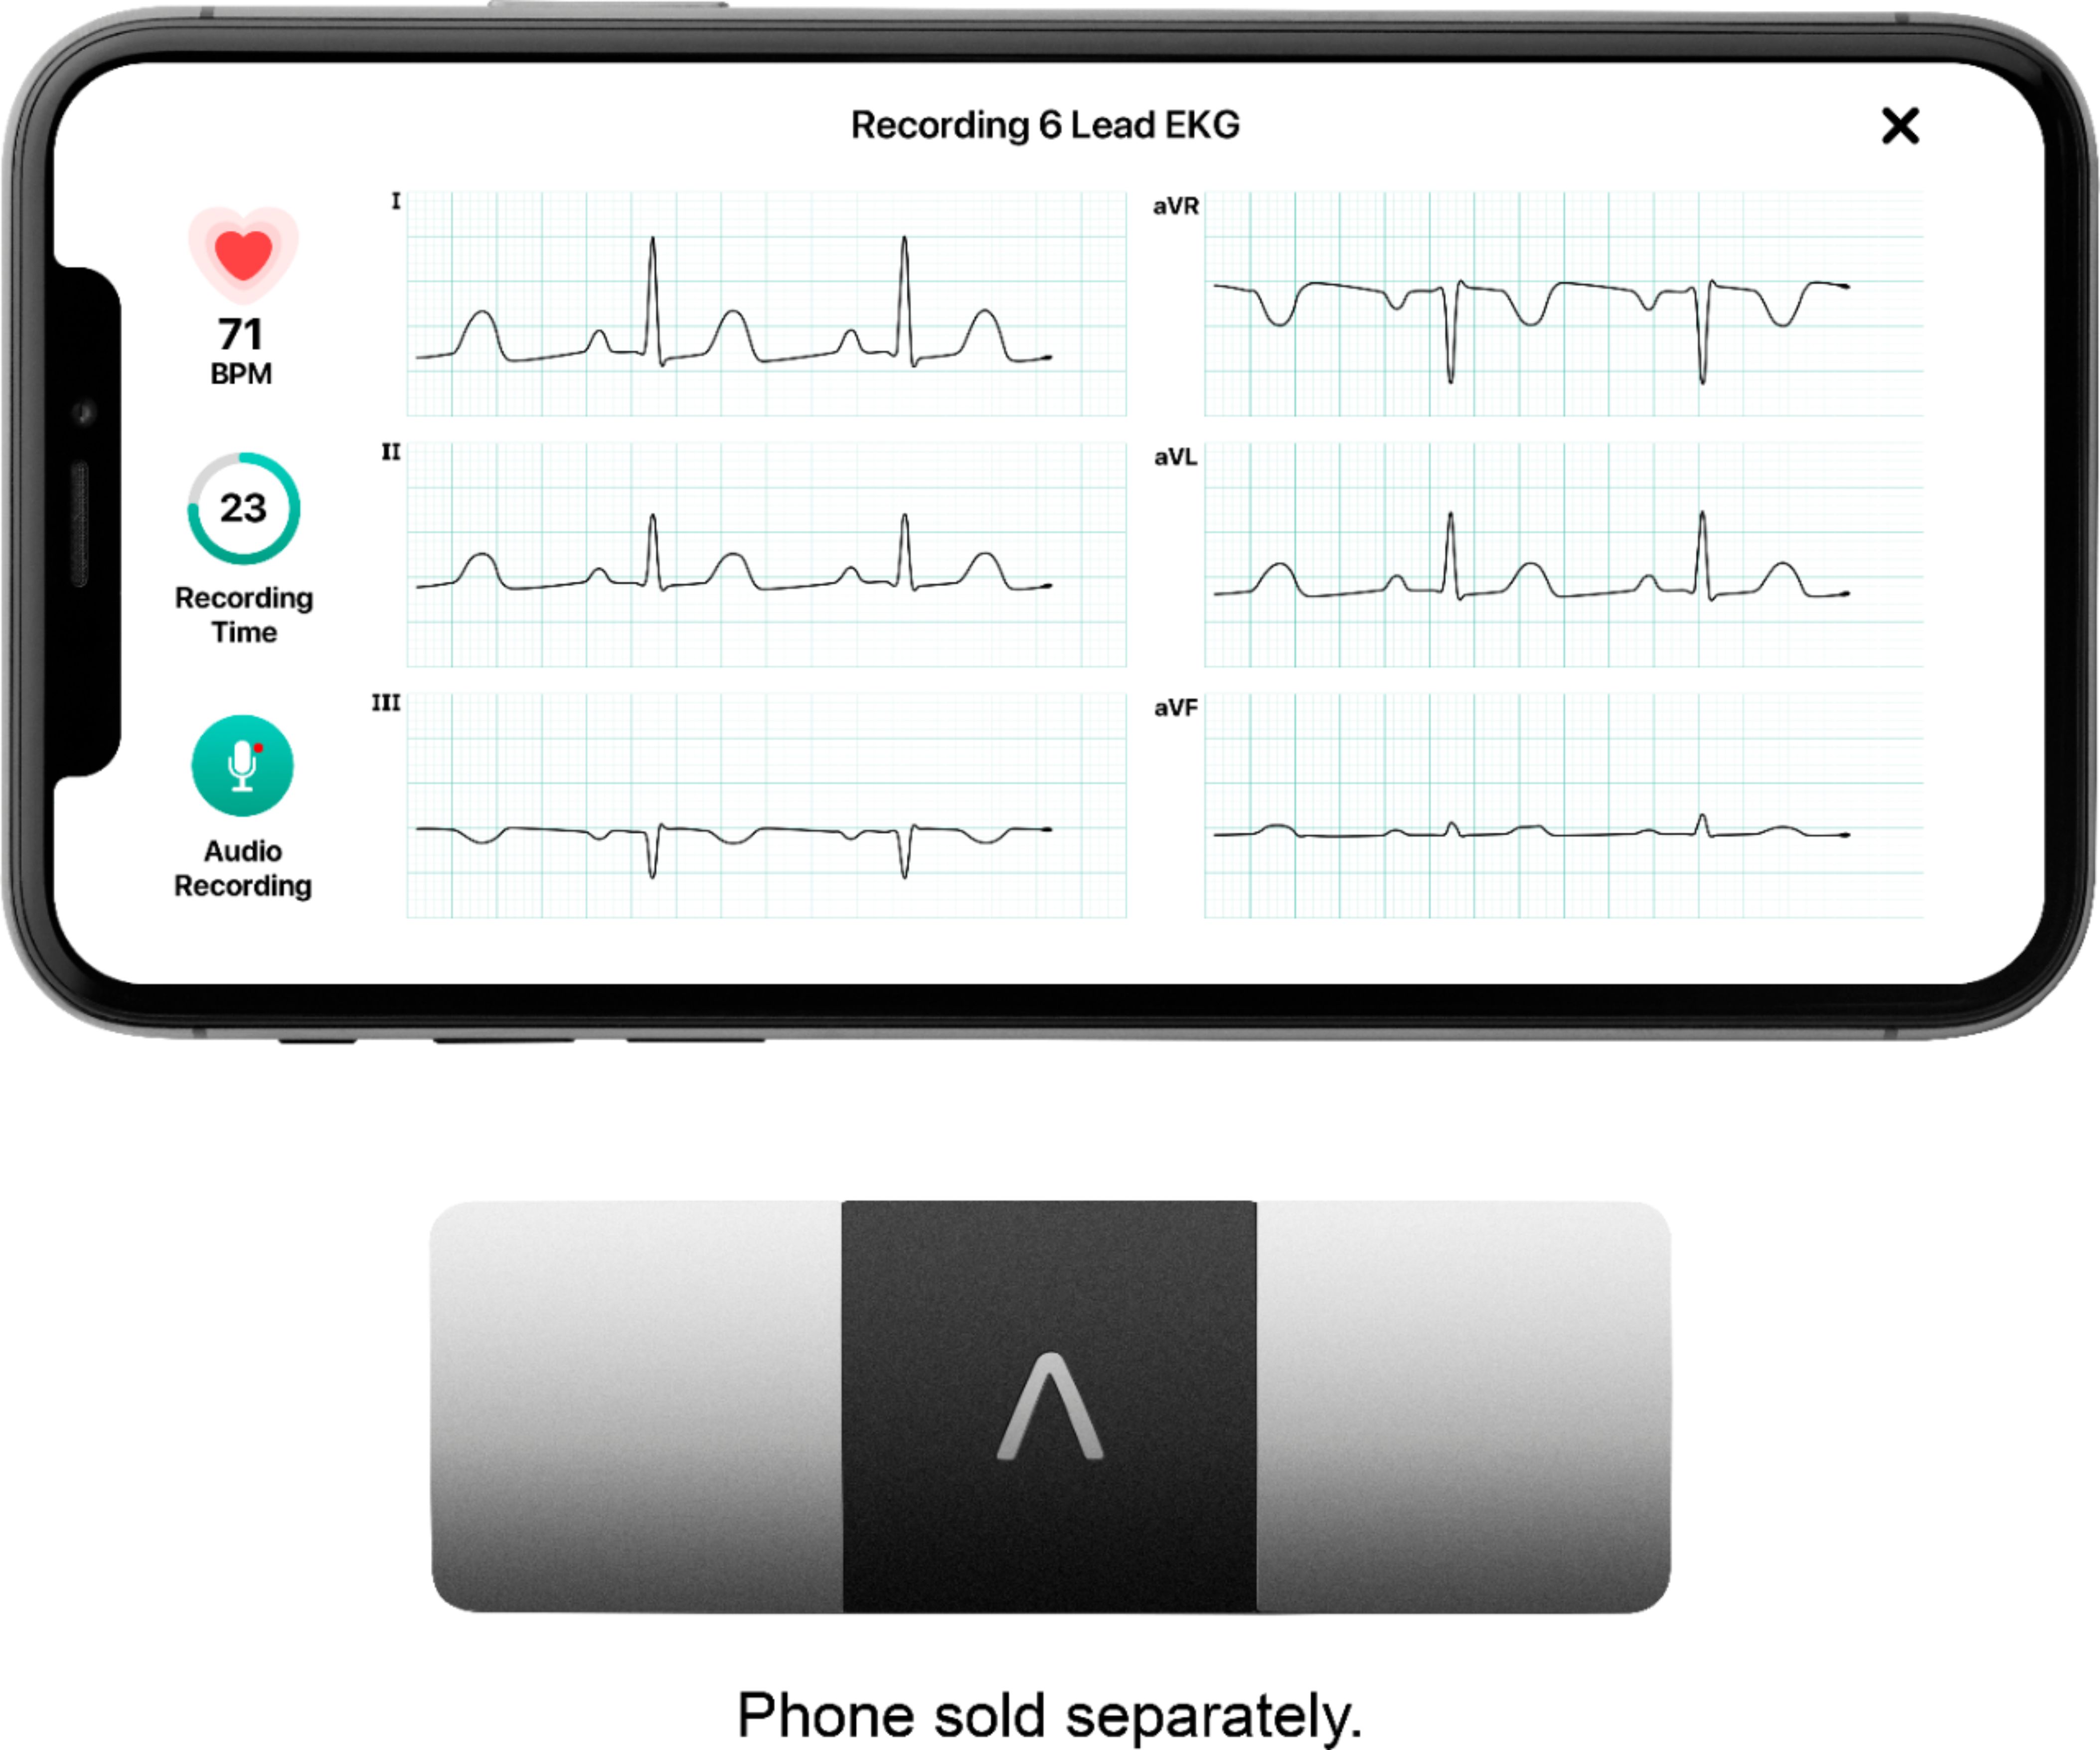 Kardia by AliveCor